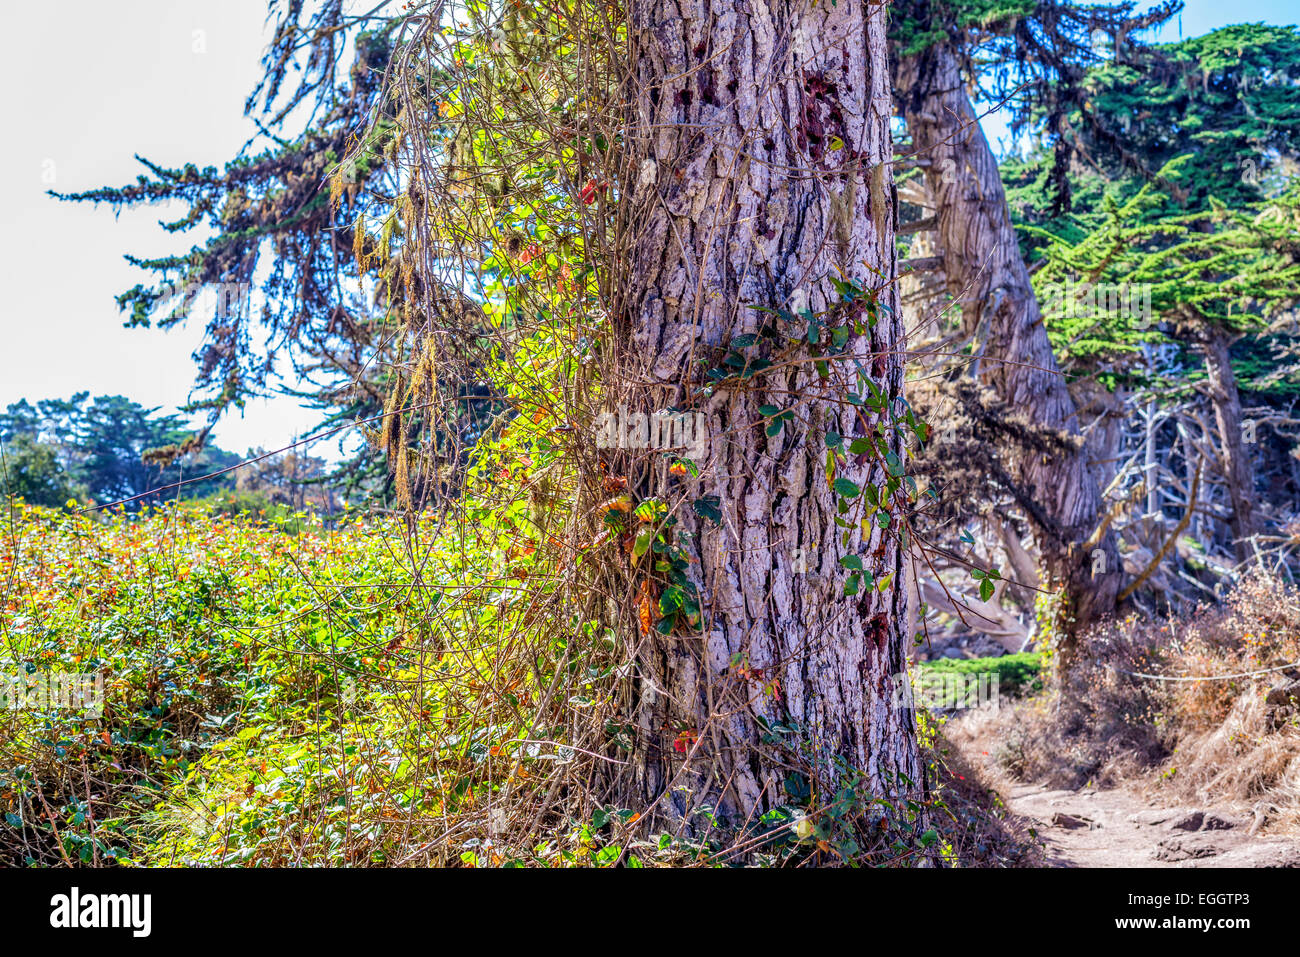 Plant vines wrapping around a pine tree trunk. Point Lobos State Reserve, Monterey county, California, United States. Stock Photo